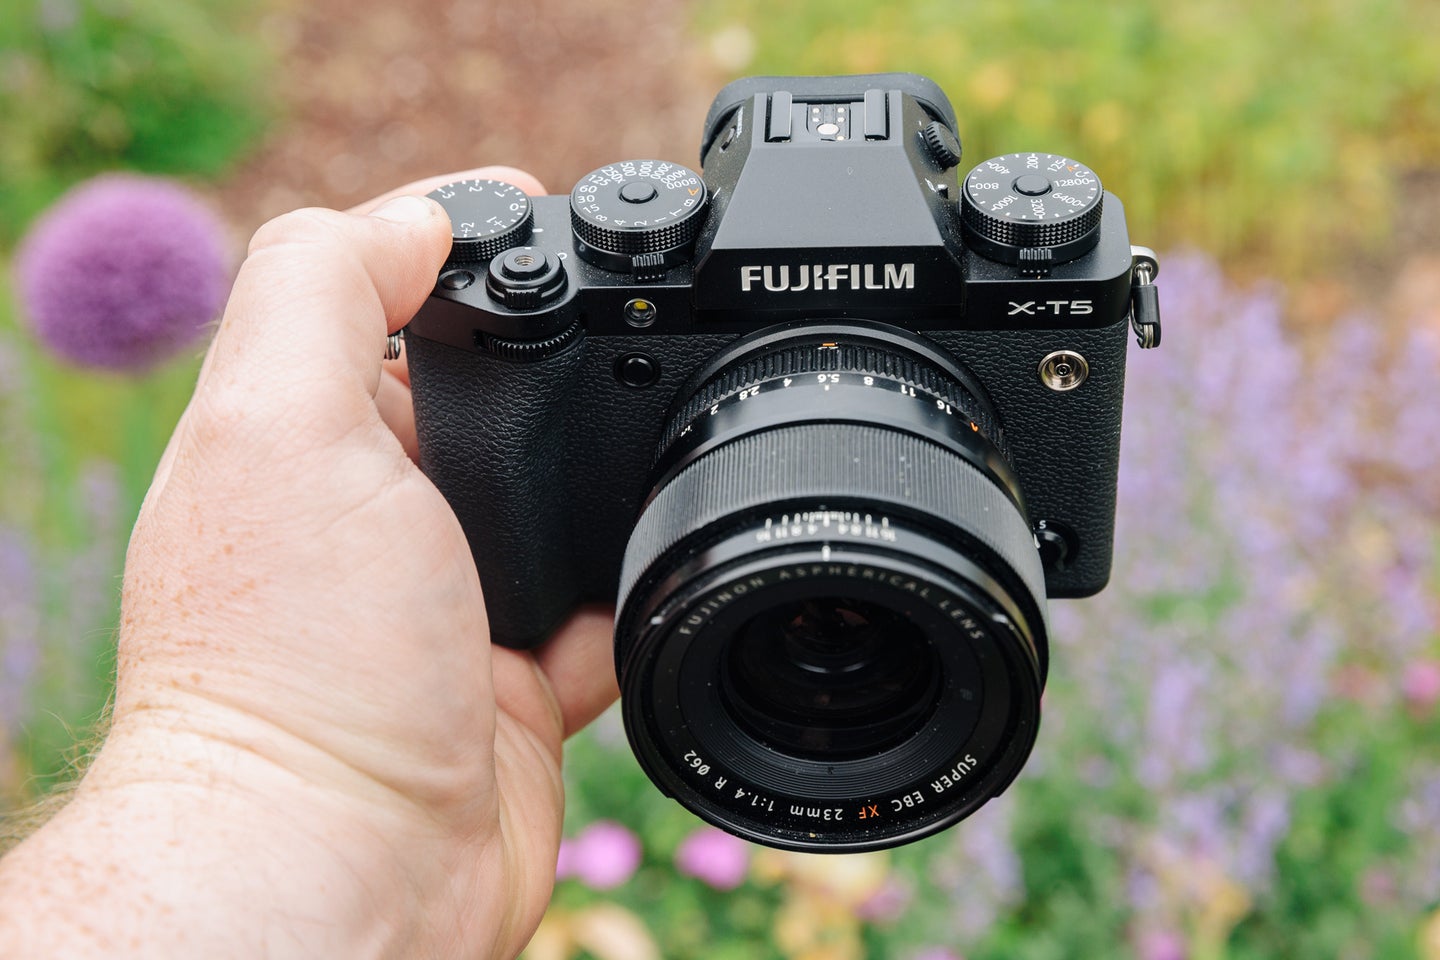 Fujifilm X-T5 Review: Beautiful but Flawed – Jerred Z Photography